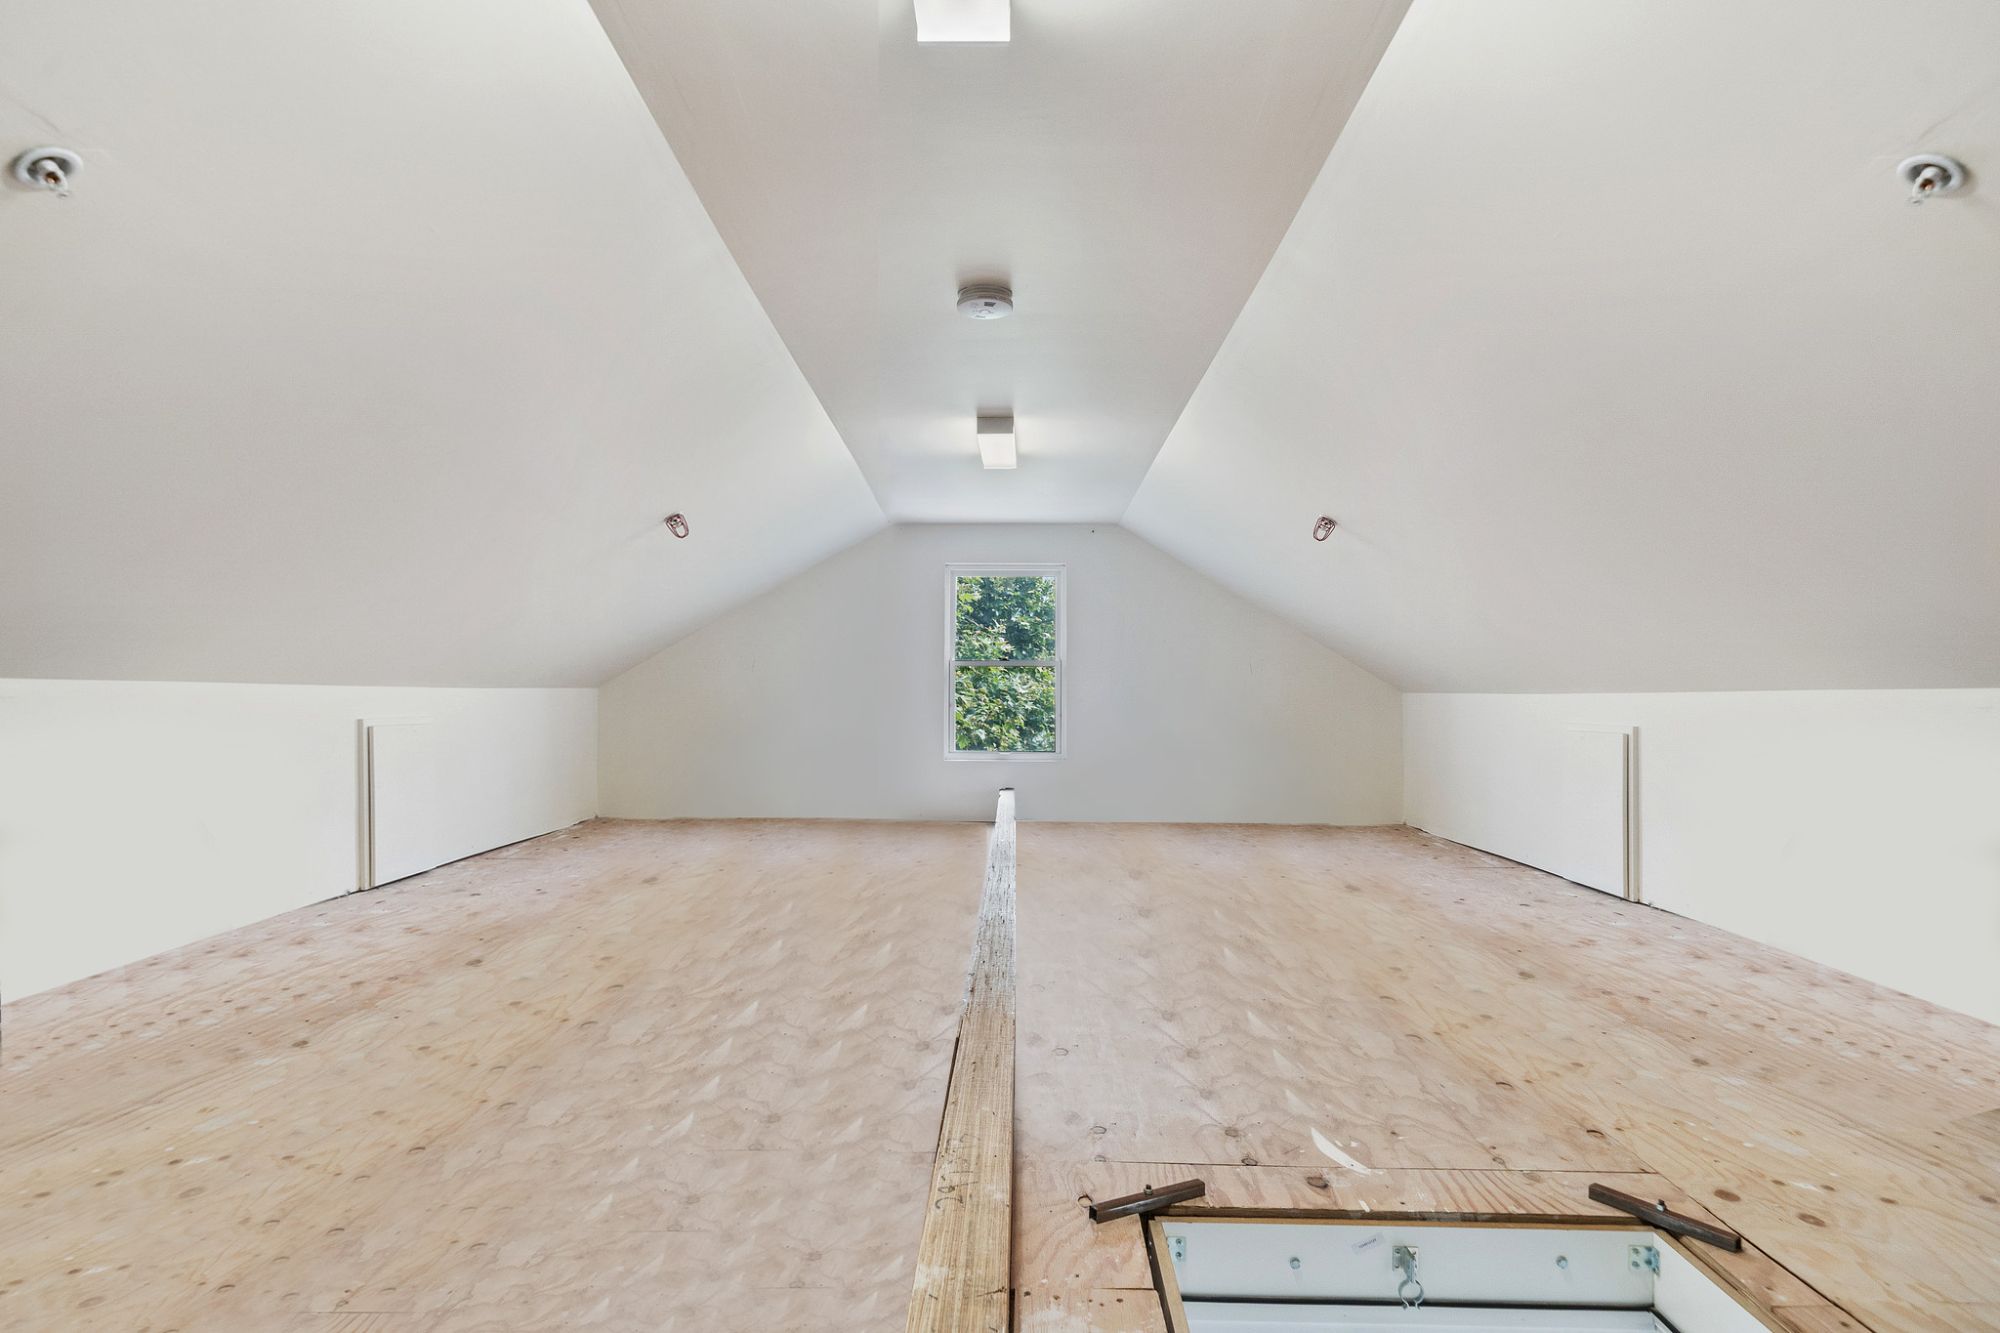 Full floor finished attic space with drop down ladder